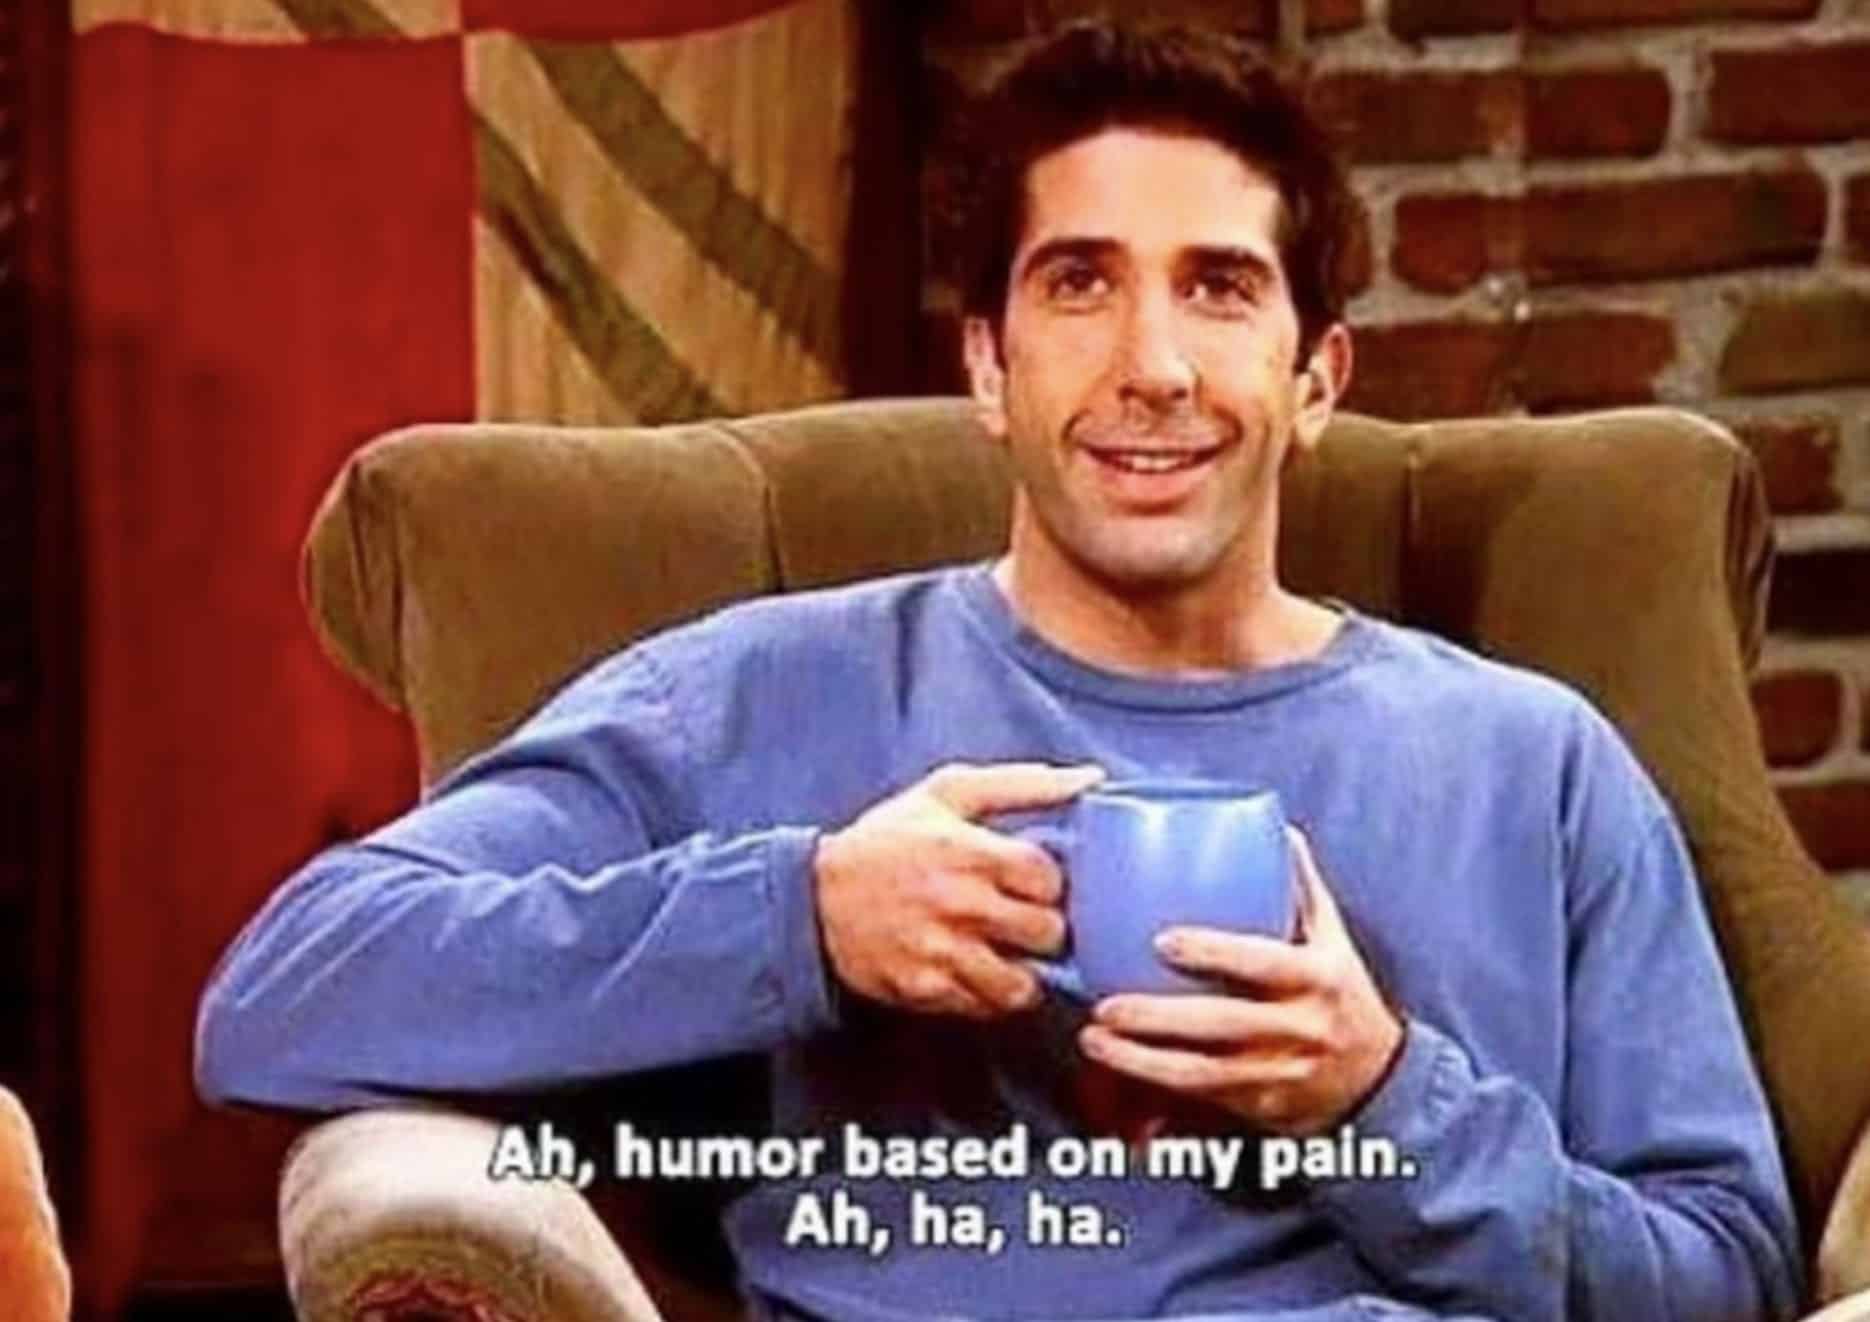 Ross from friends with text saying humor based on my pain.